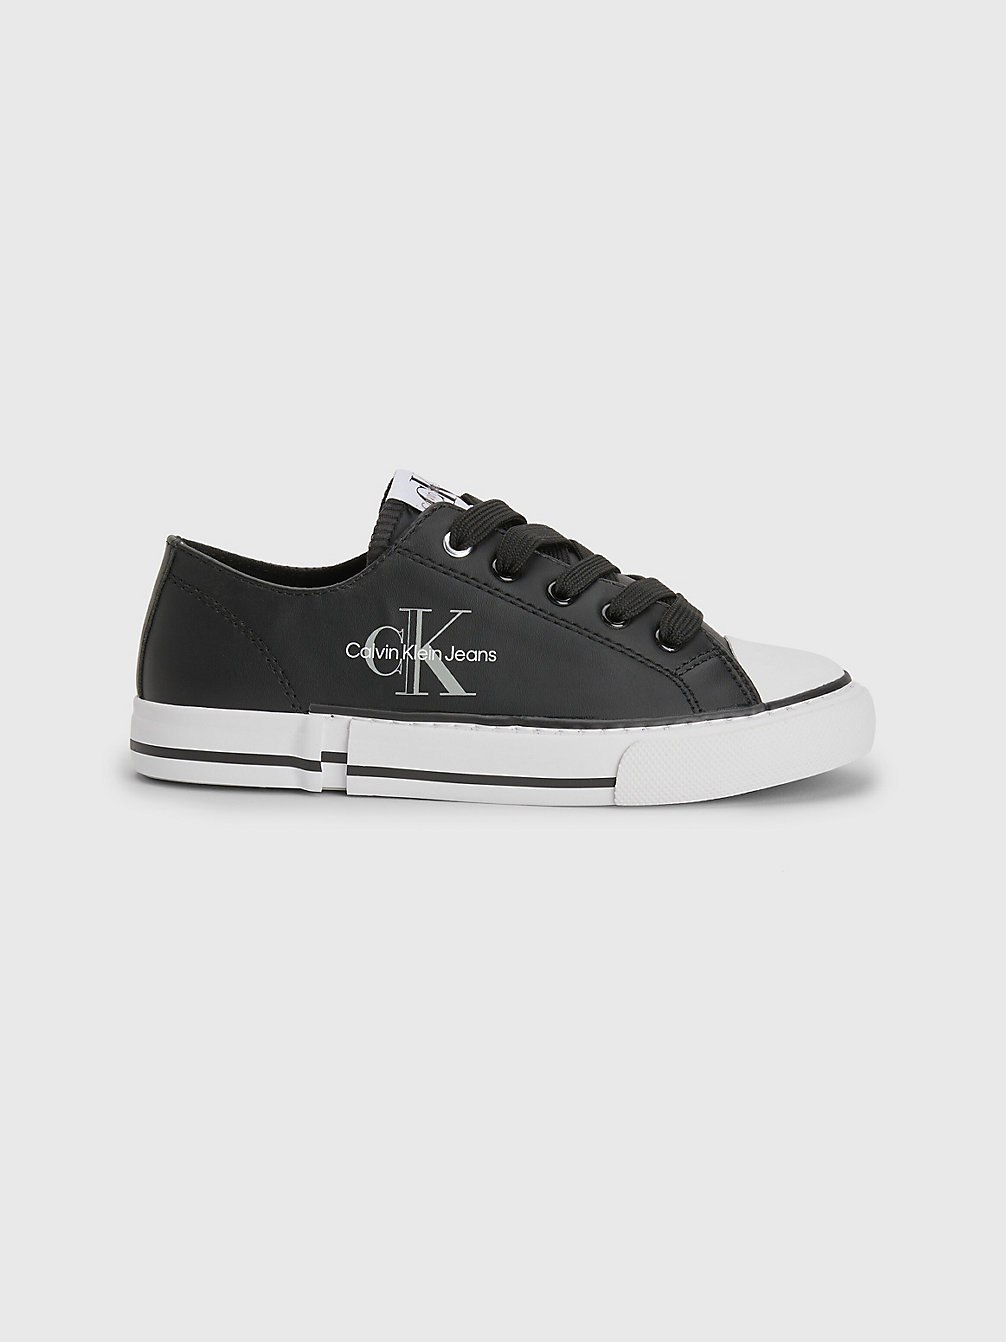 BLACK Recycled Kids Trainers undefined kids unisex Calvin Klein